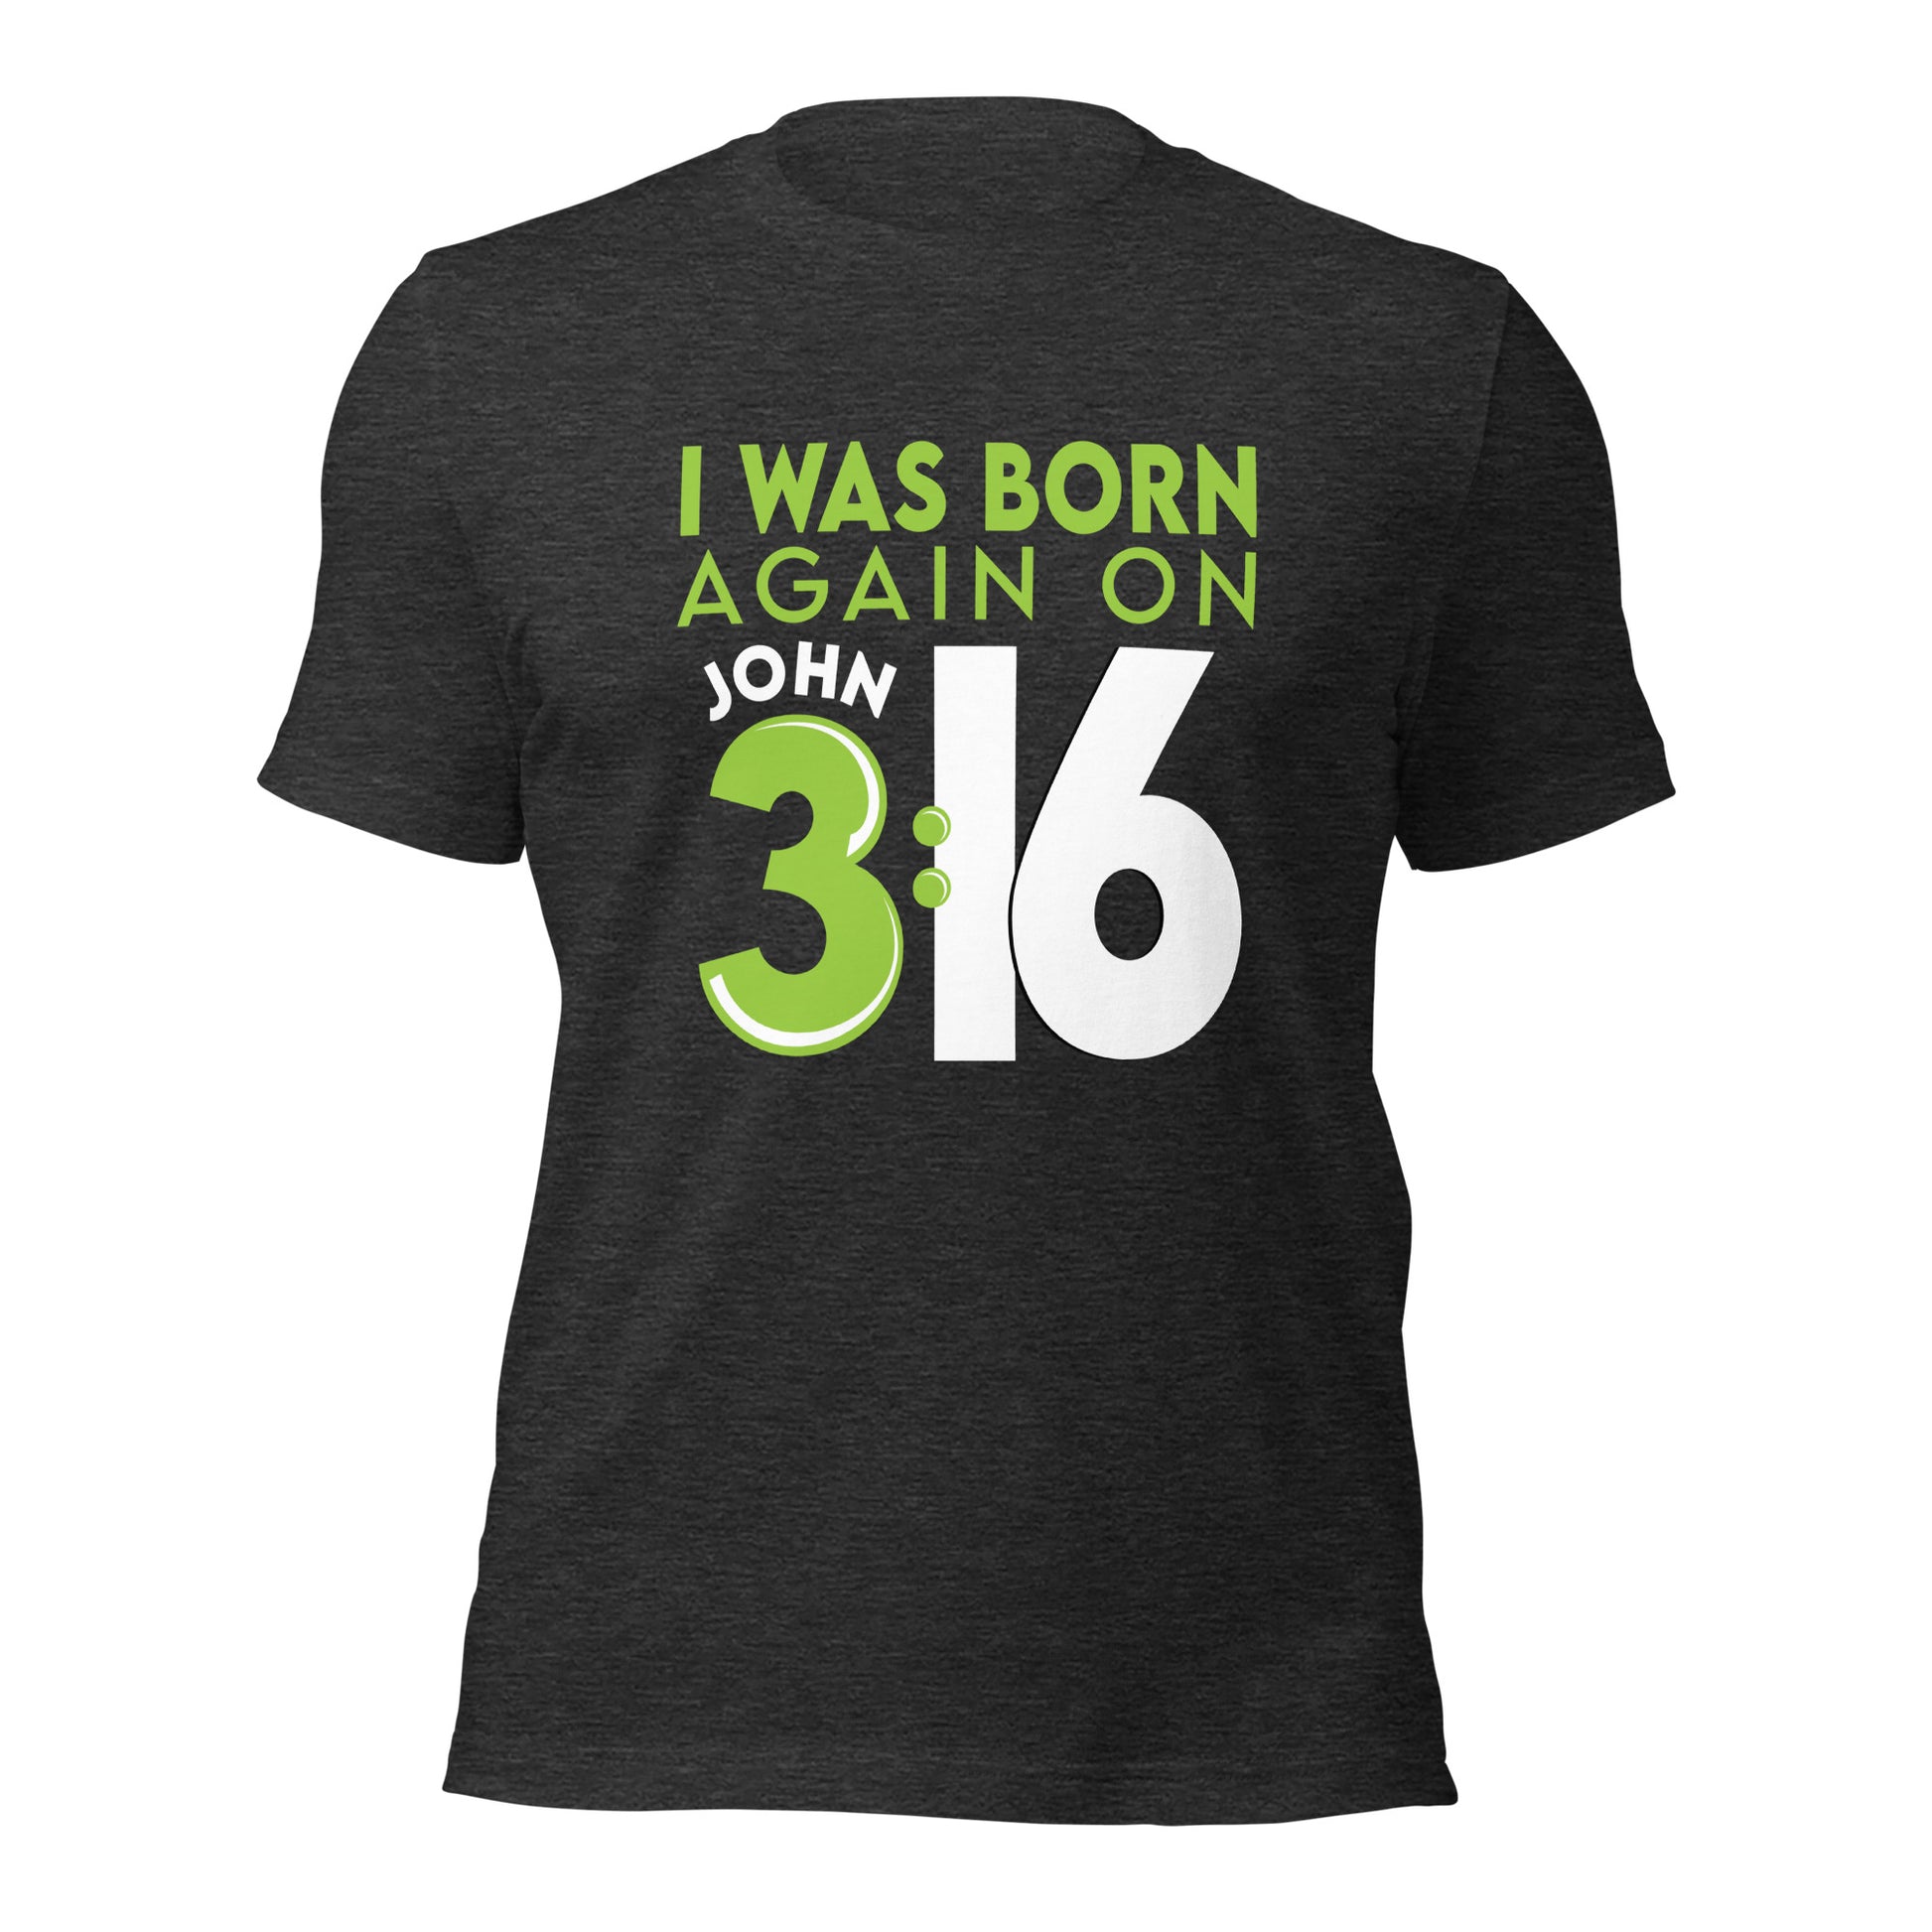 Heather Dark Gray Christian aesthetic unisex t-shirt with a play on words that says, I Was Born Again on John 3:16, bible verse scripture quote in lime green and black, designed for men and women